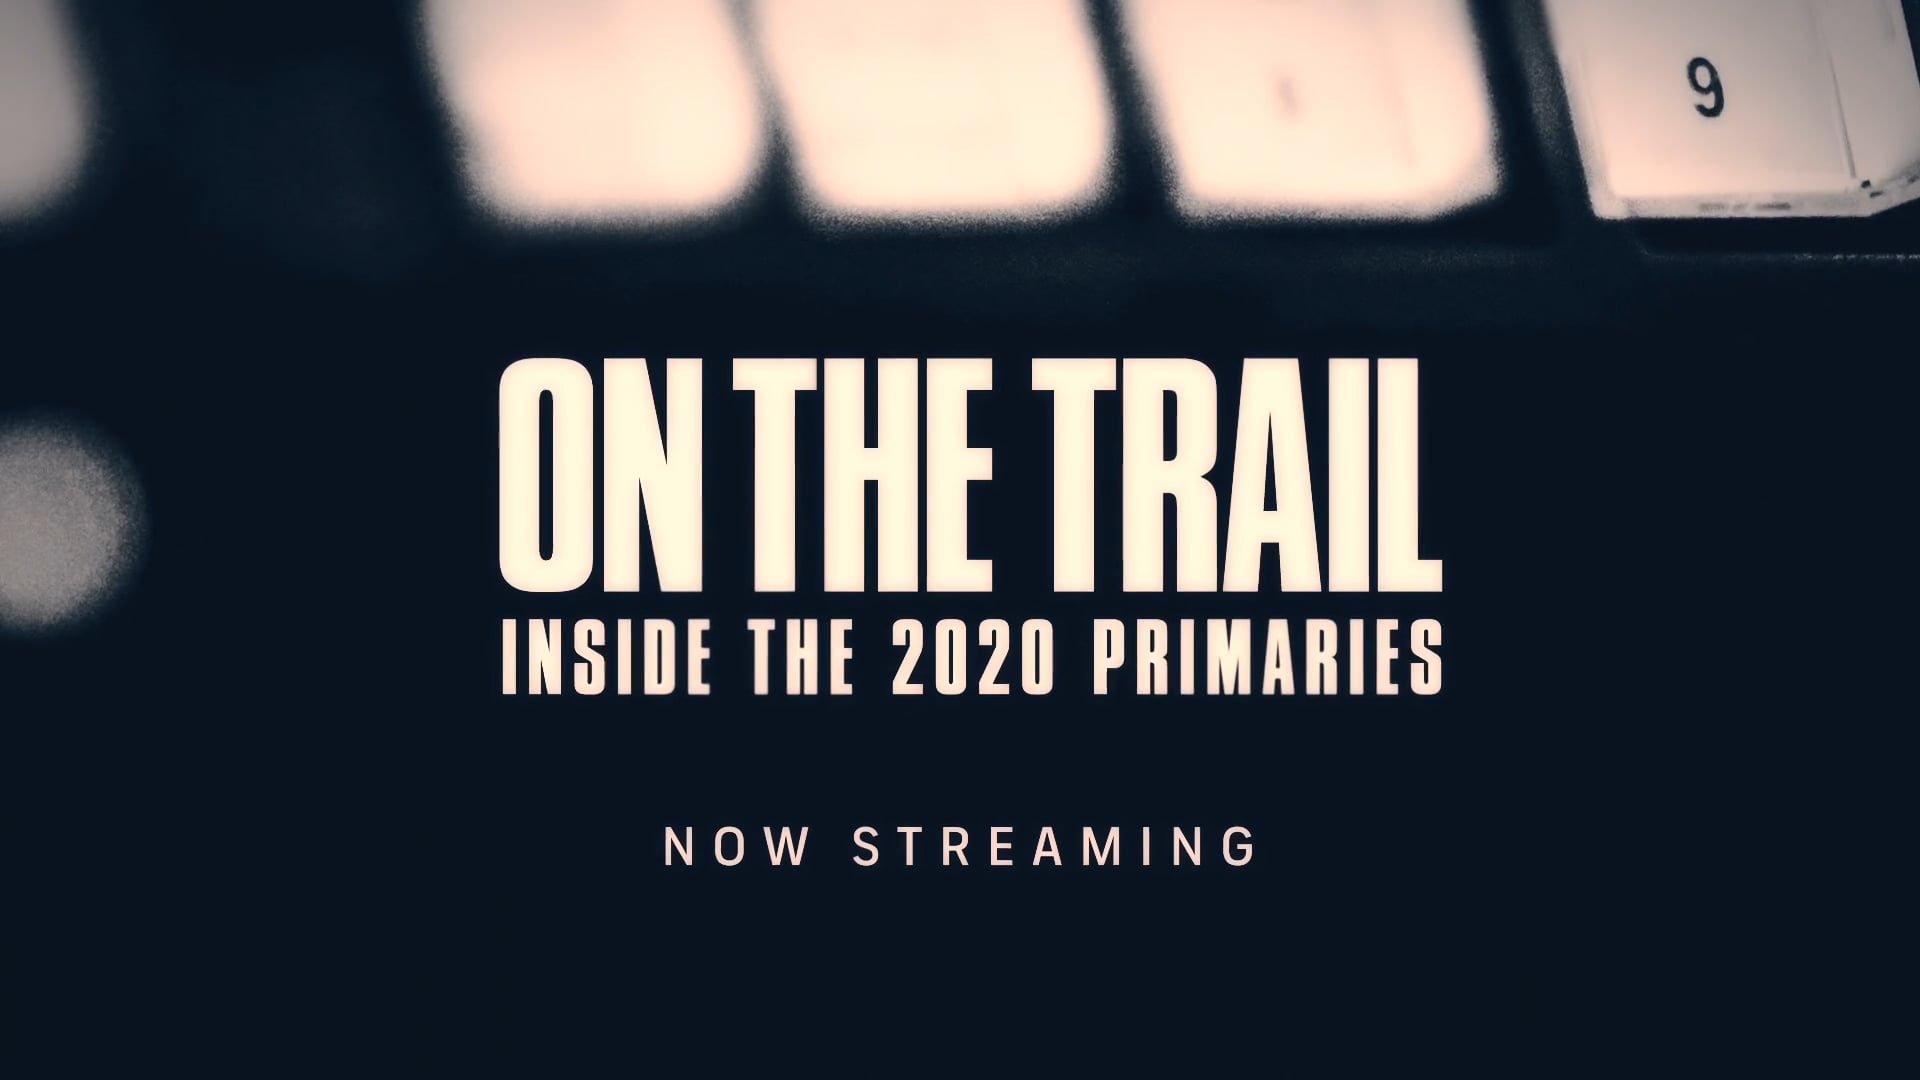 On the Trail: Inside the 2020 Primaries